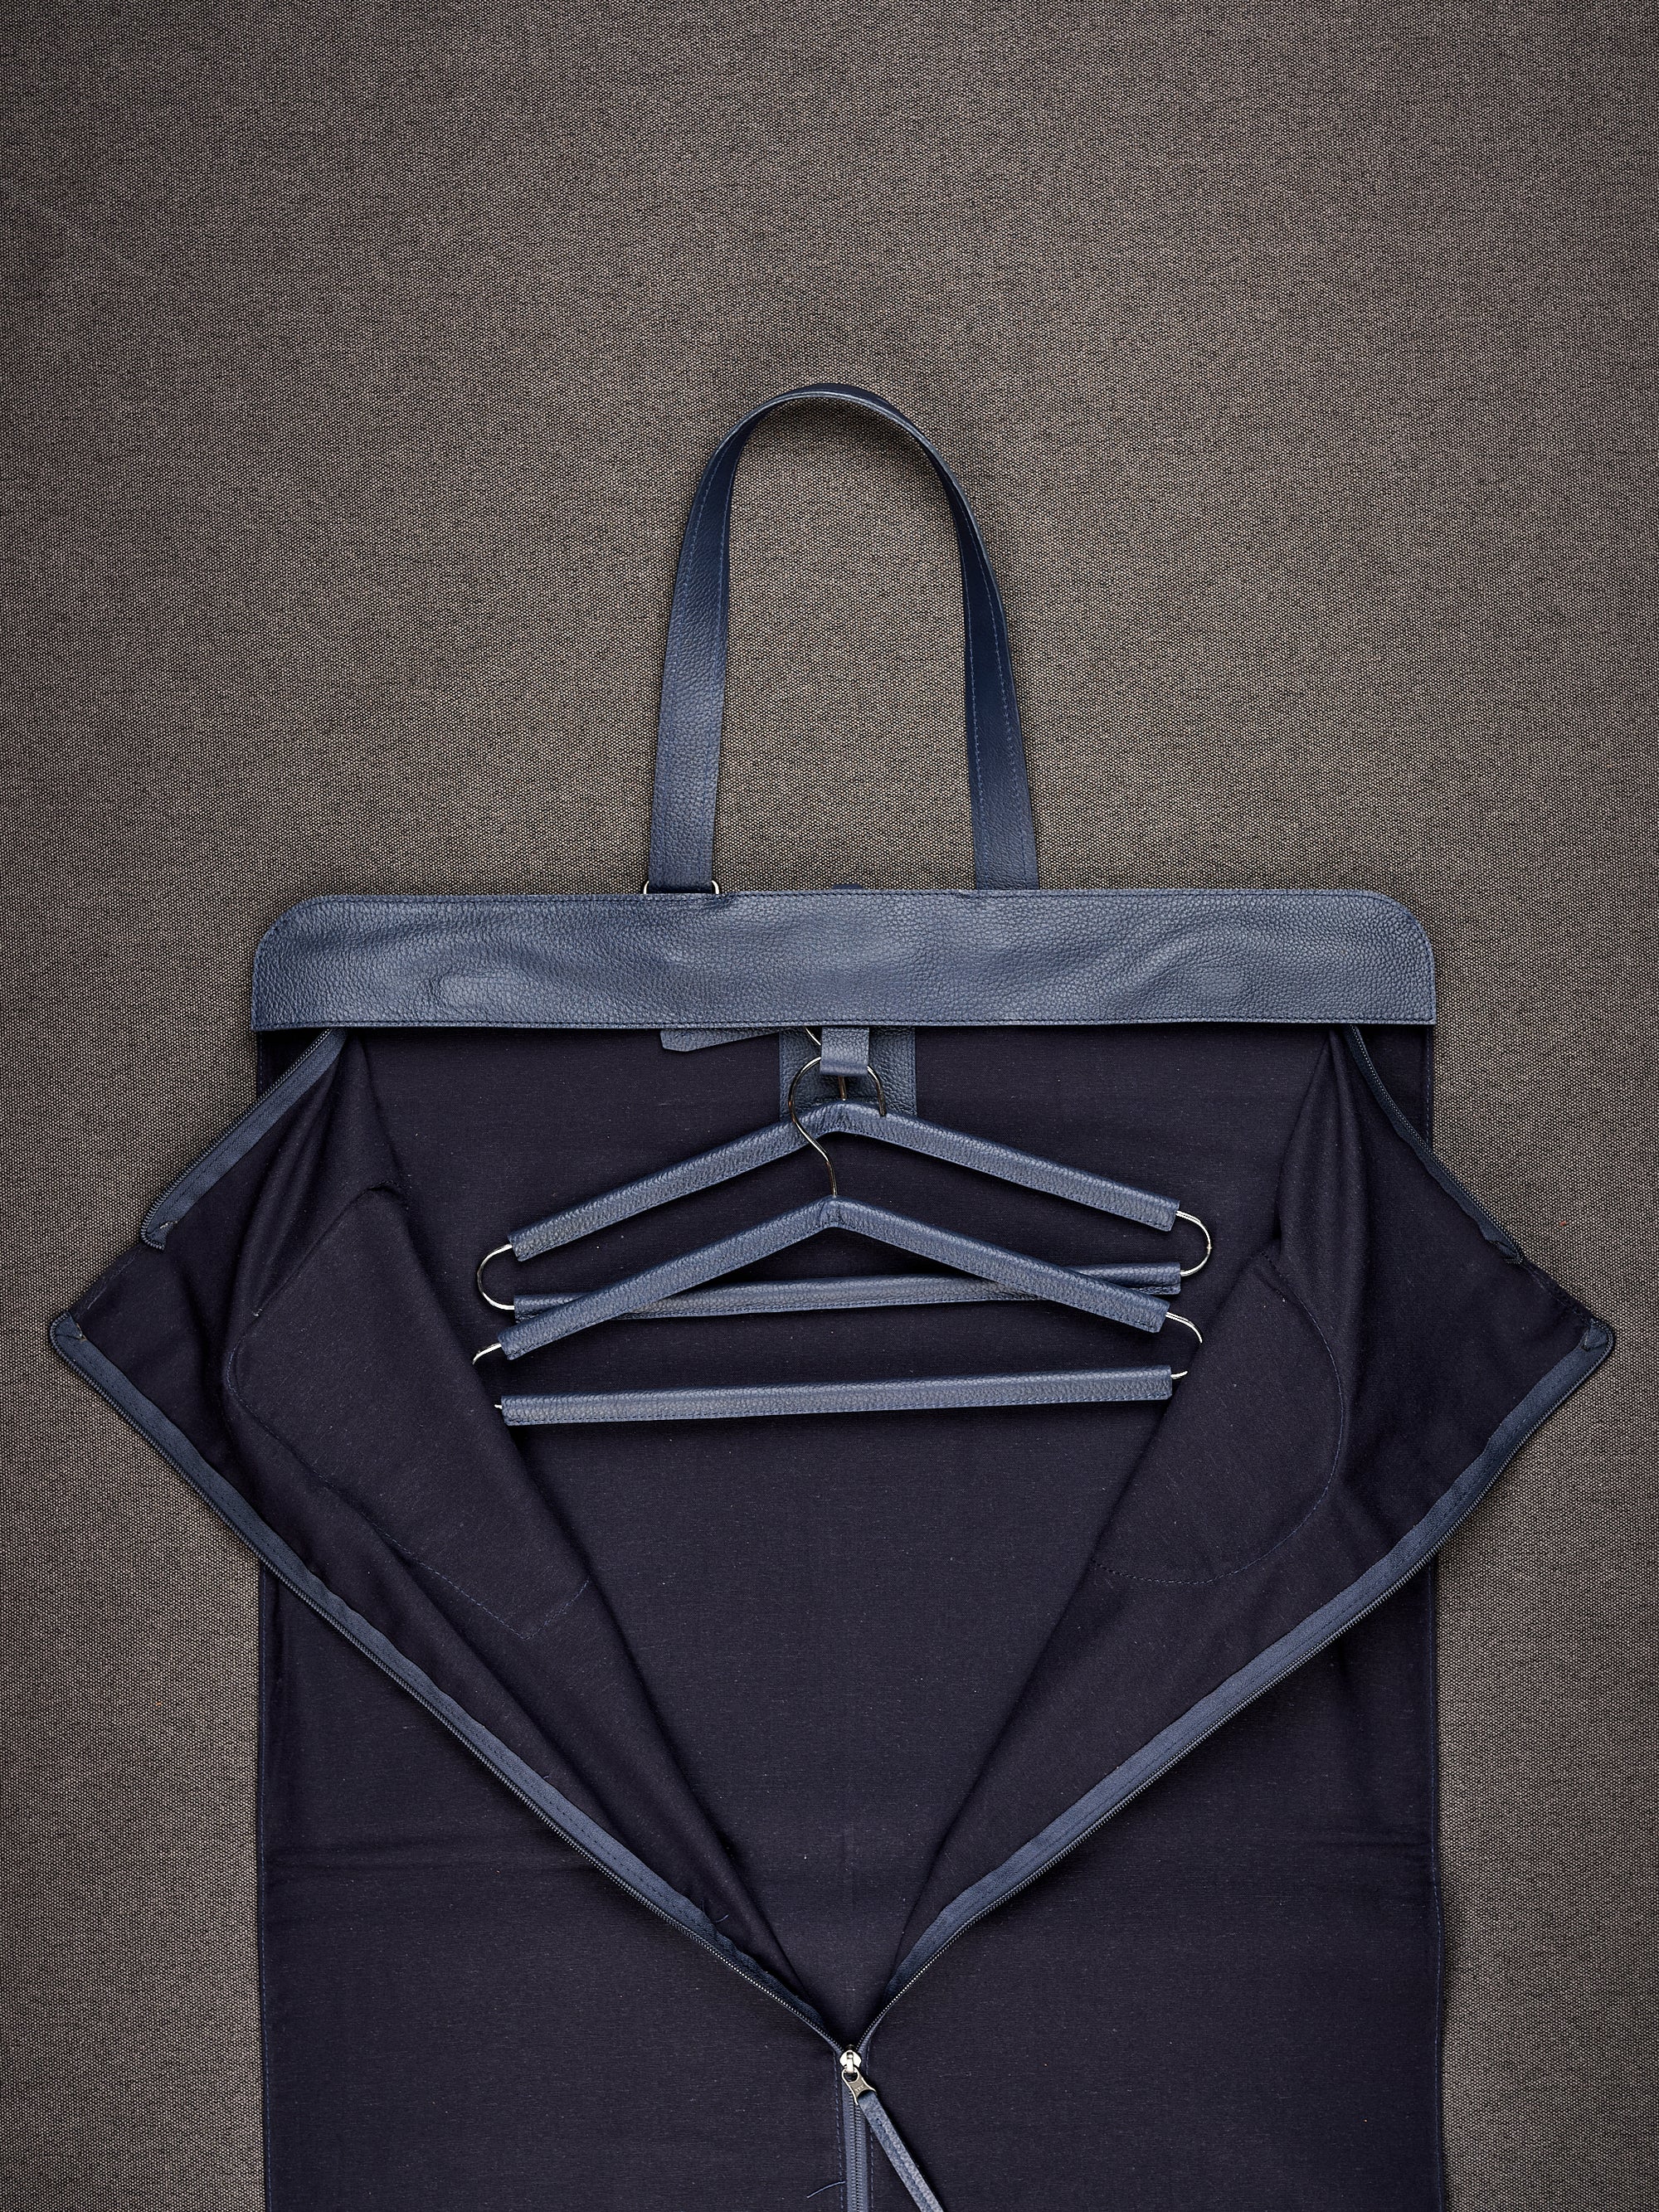 Wide Opening. Leather Garment Bag Navy by Capra Leather